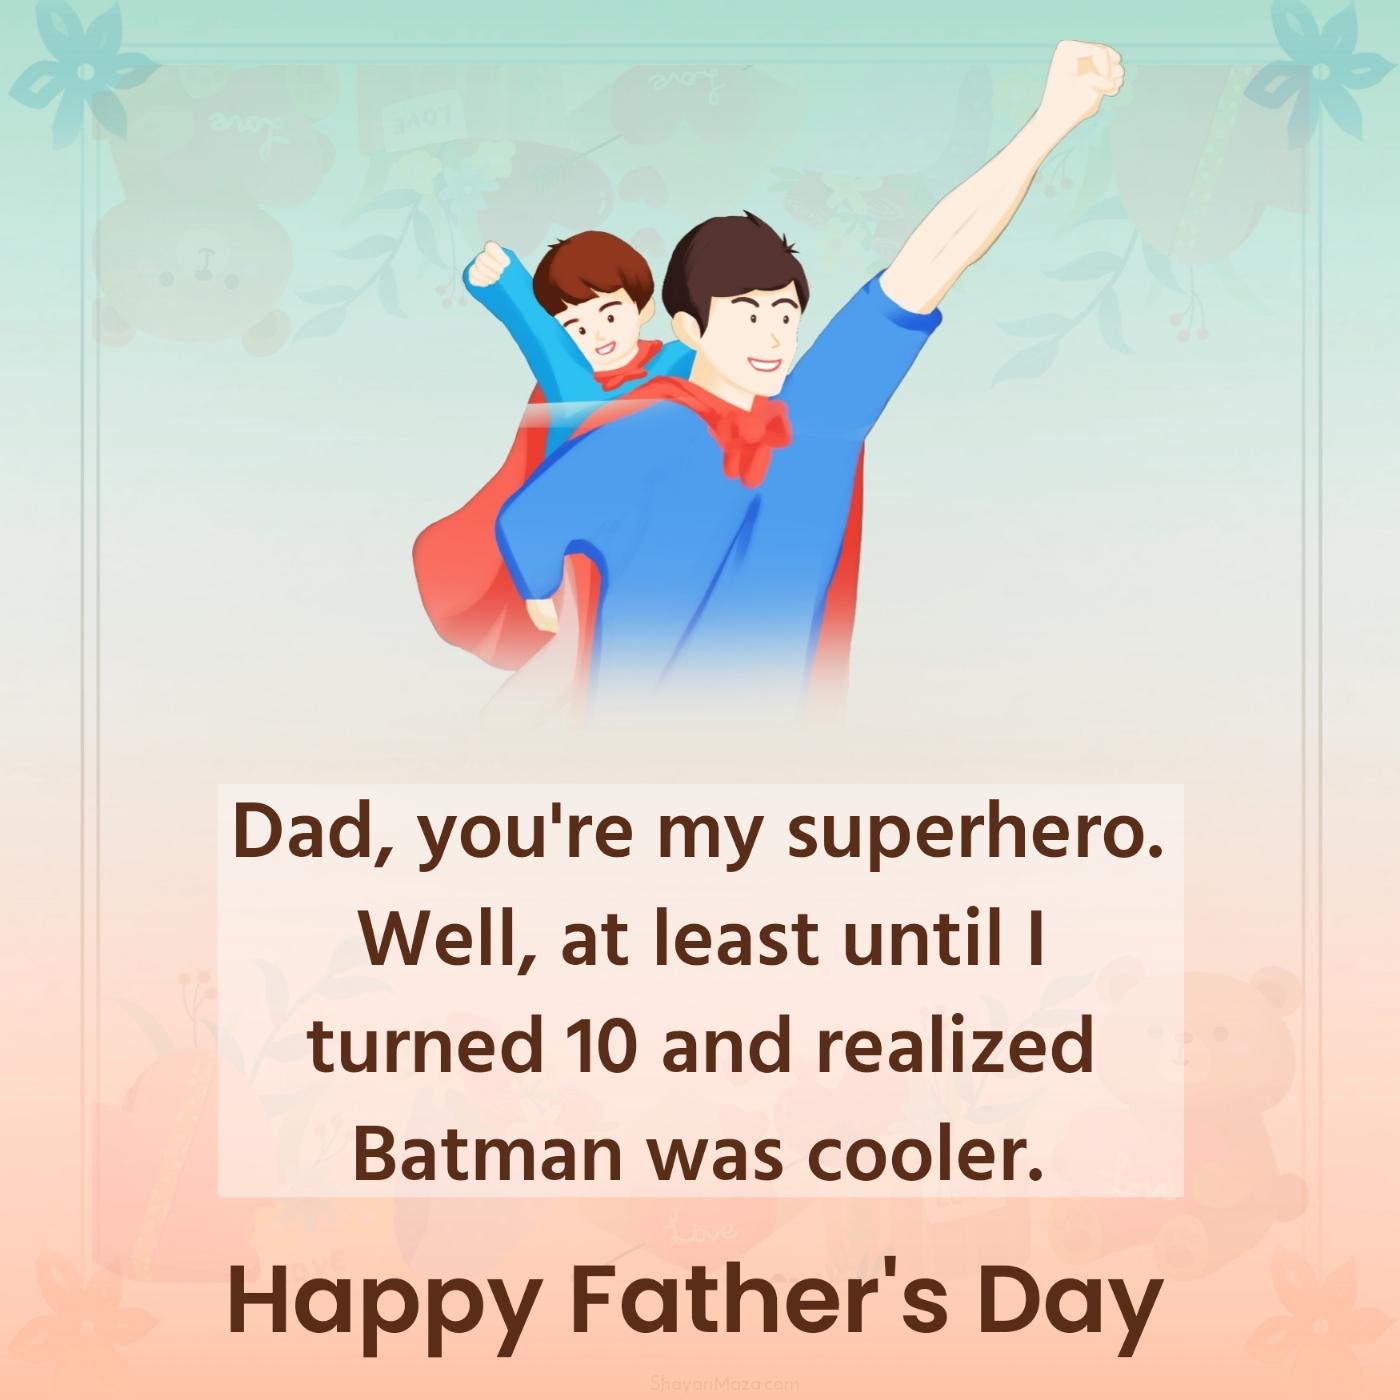 Dad you're my superhero Well at least until I turned 10